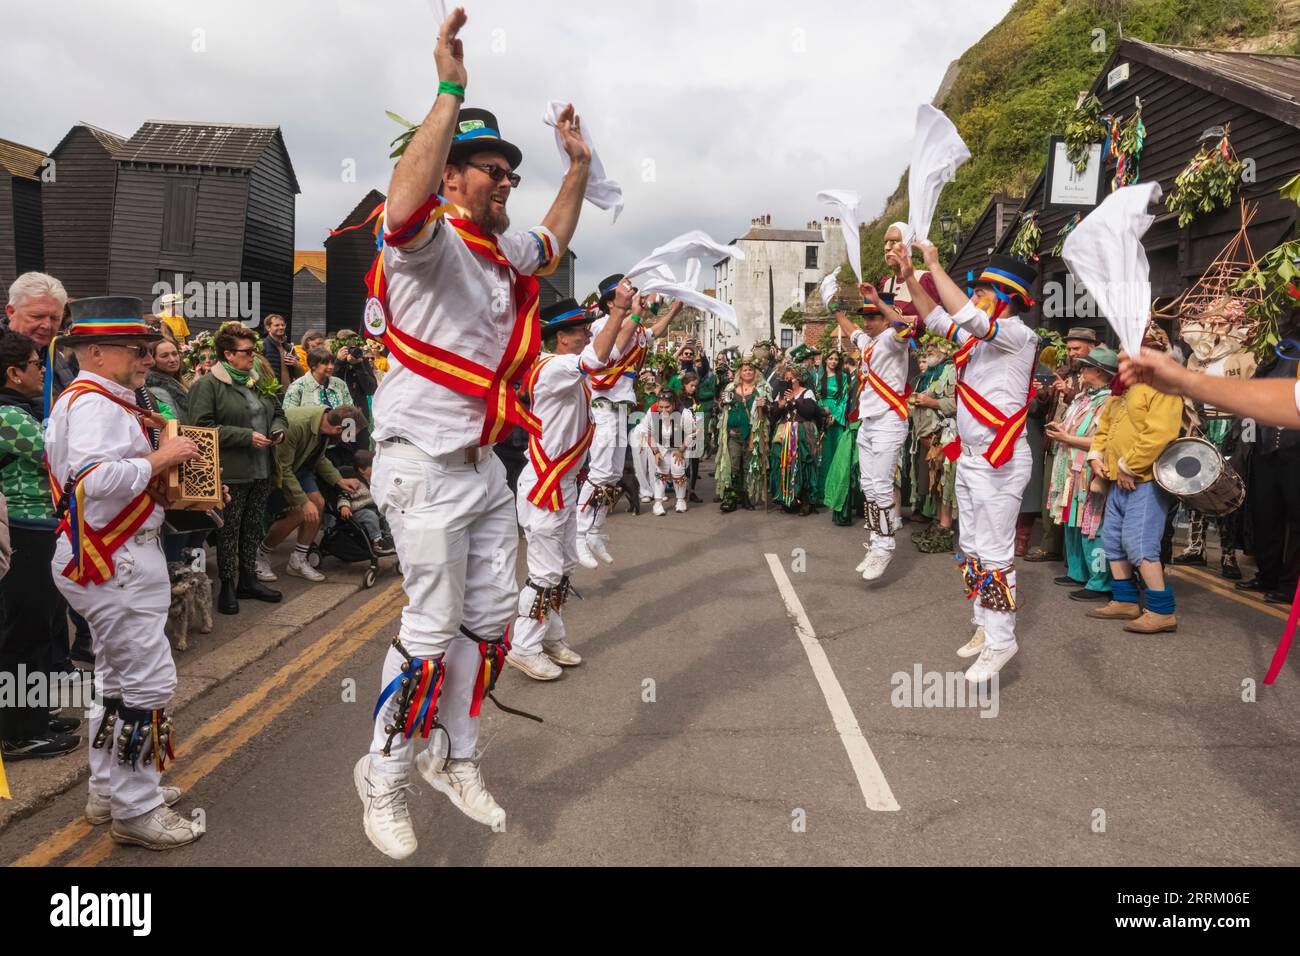 England, Sussex, East Sussex, Hastings, The Old Town, Morris Dancers in The Annual Jack in The Green Festival Stock Photo